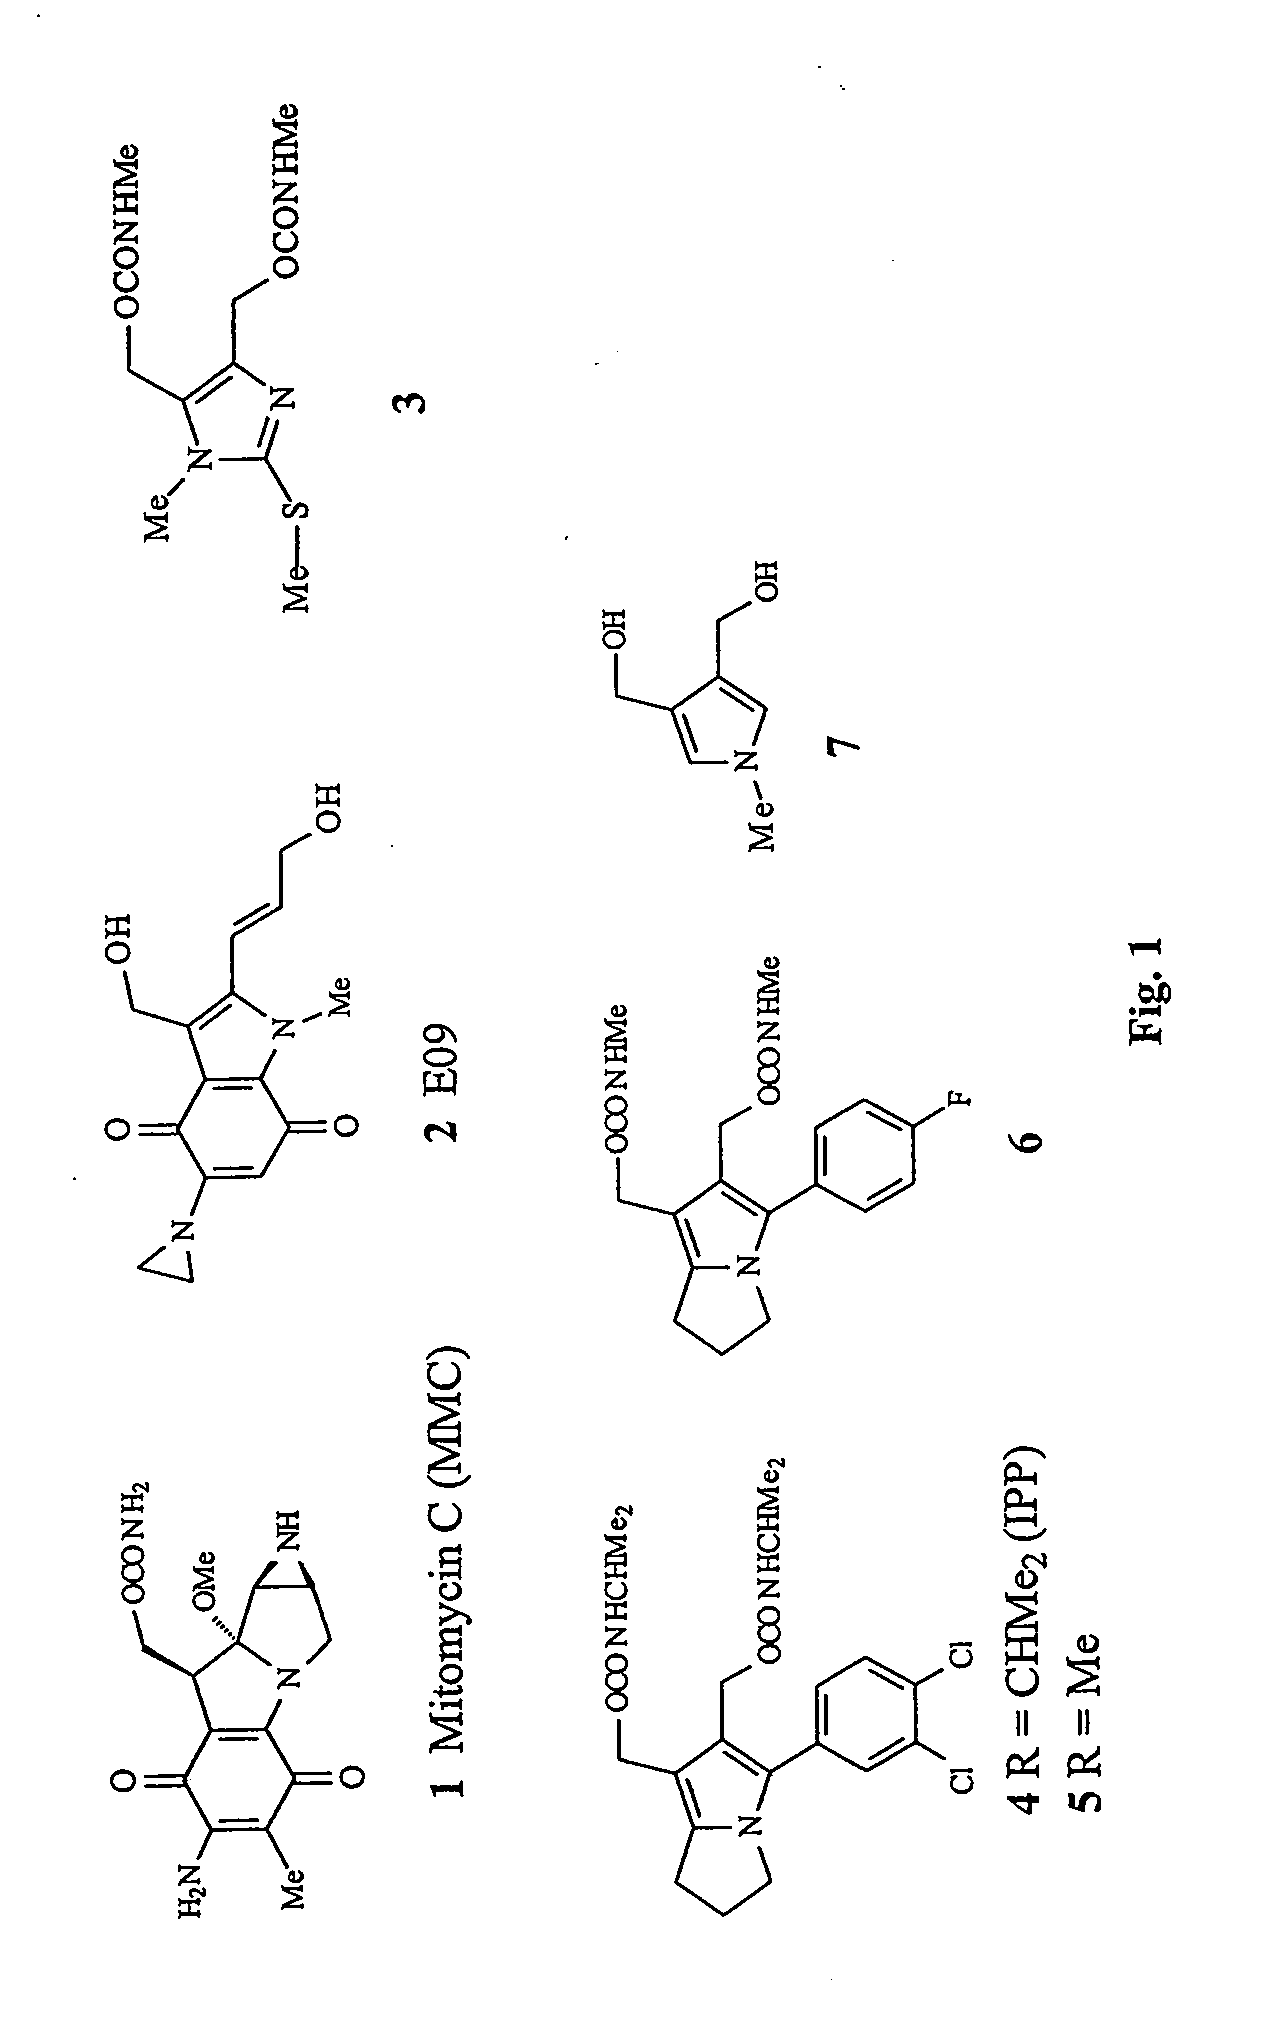 Synthesis of 8h-3a-aza-cyclopenta[a]indenes and 5,10-dihydropyrrolo[1,2-b]isoquinolines derivatives and their use as antitumor therapeutic agents